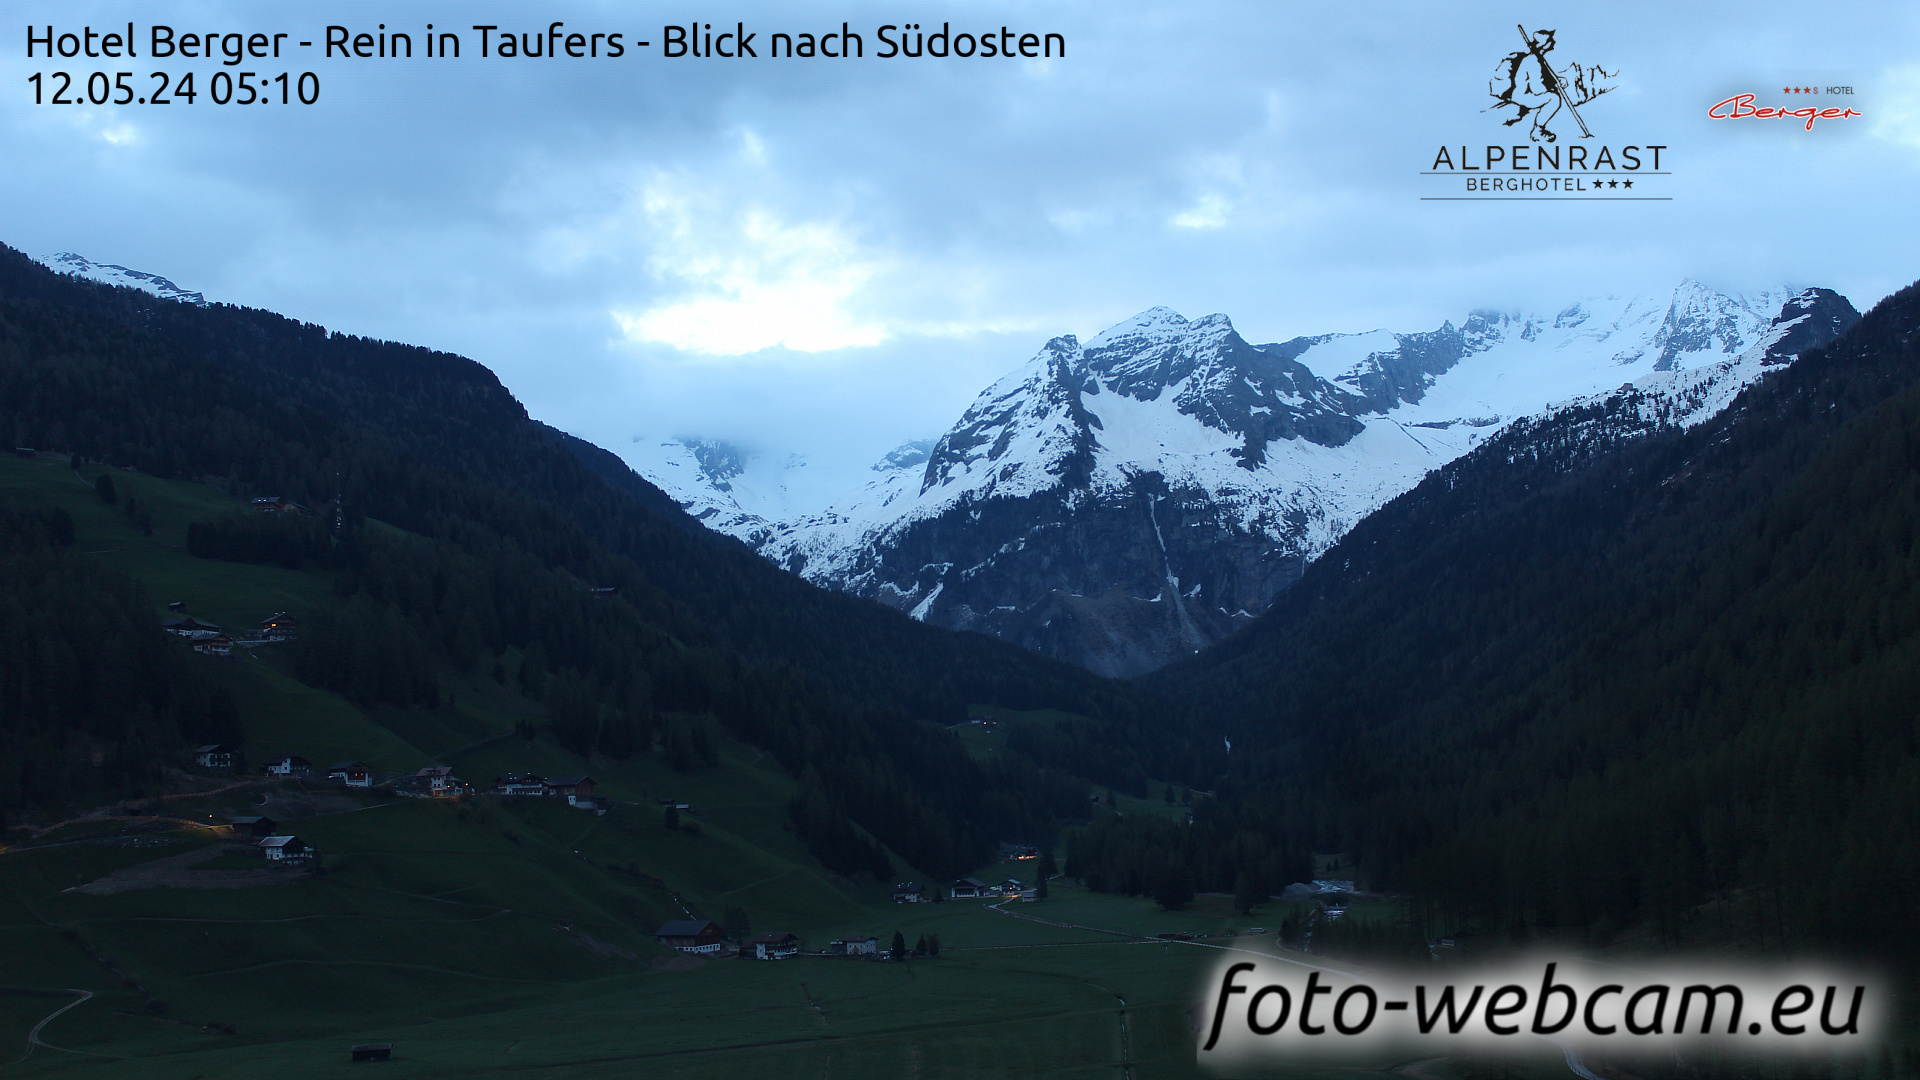 Rein in Taufers Do. 05:11